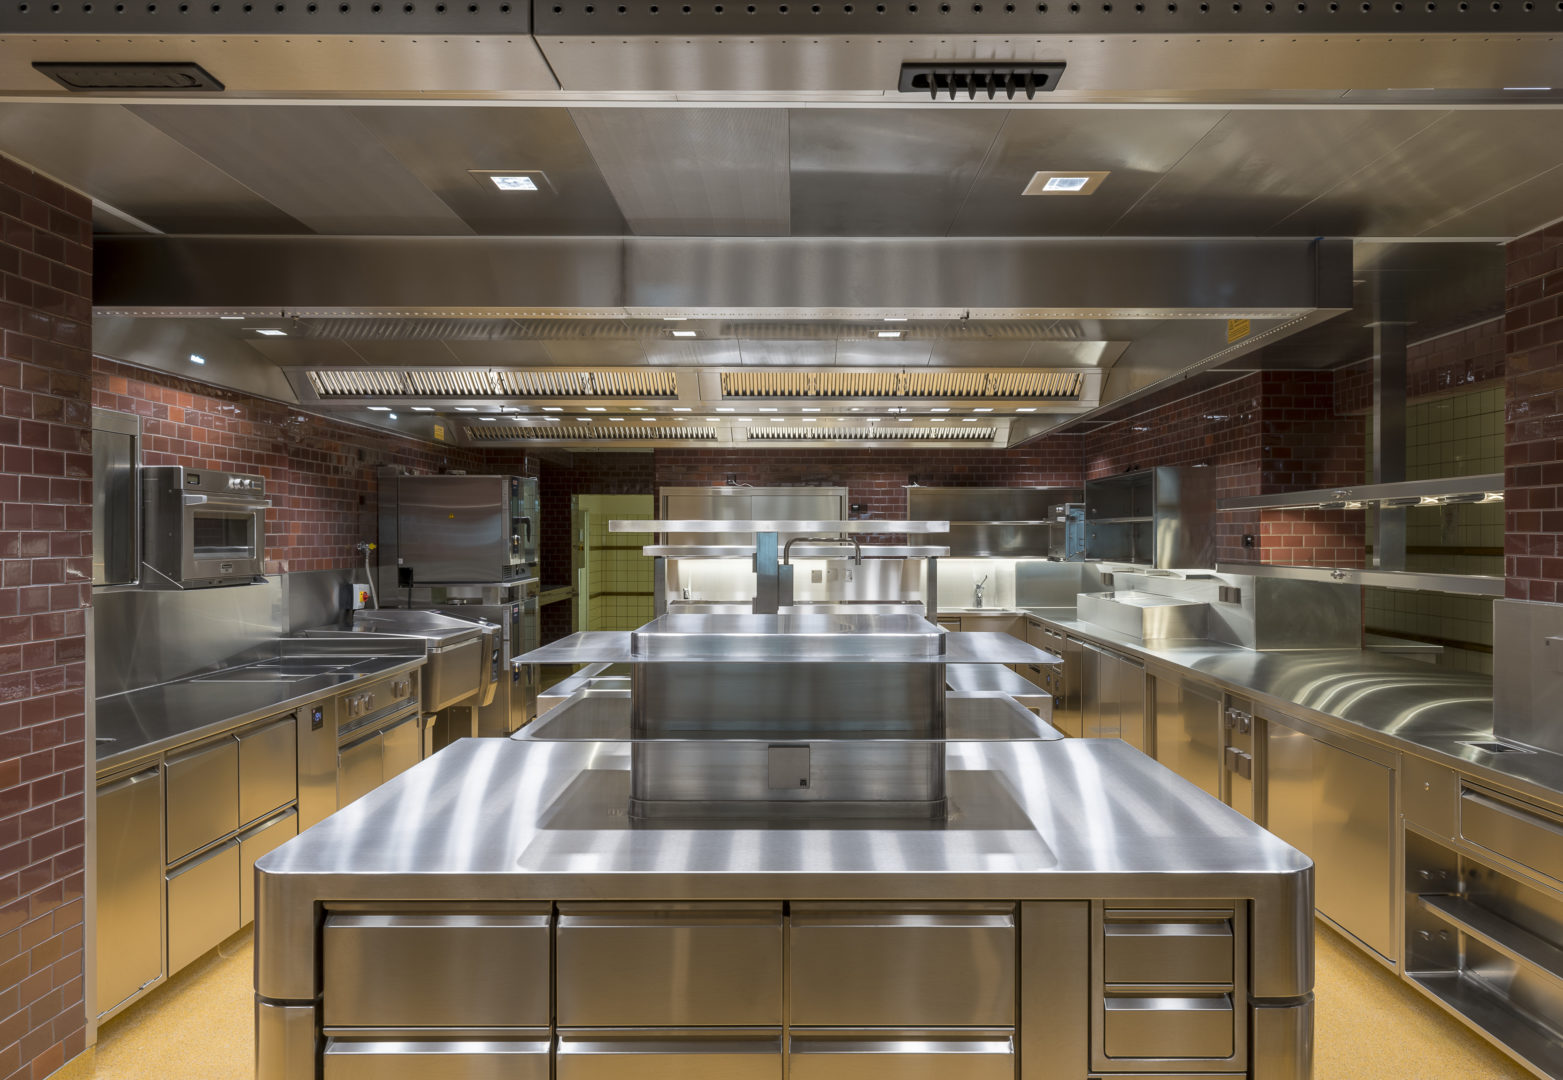 Grill Royal Berlin has chosen Halton Solutions for the ventilation of their kitchen